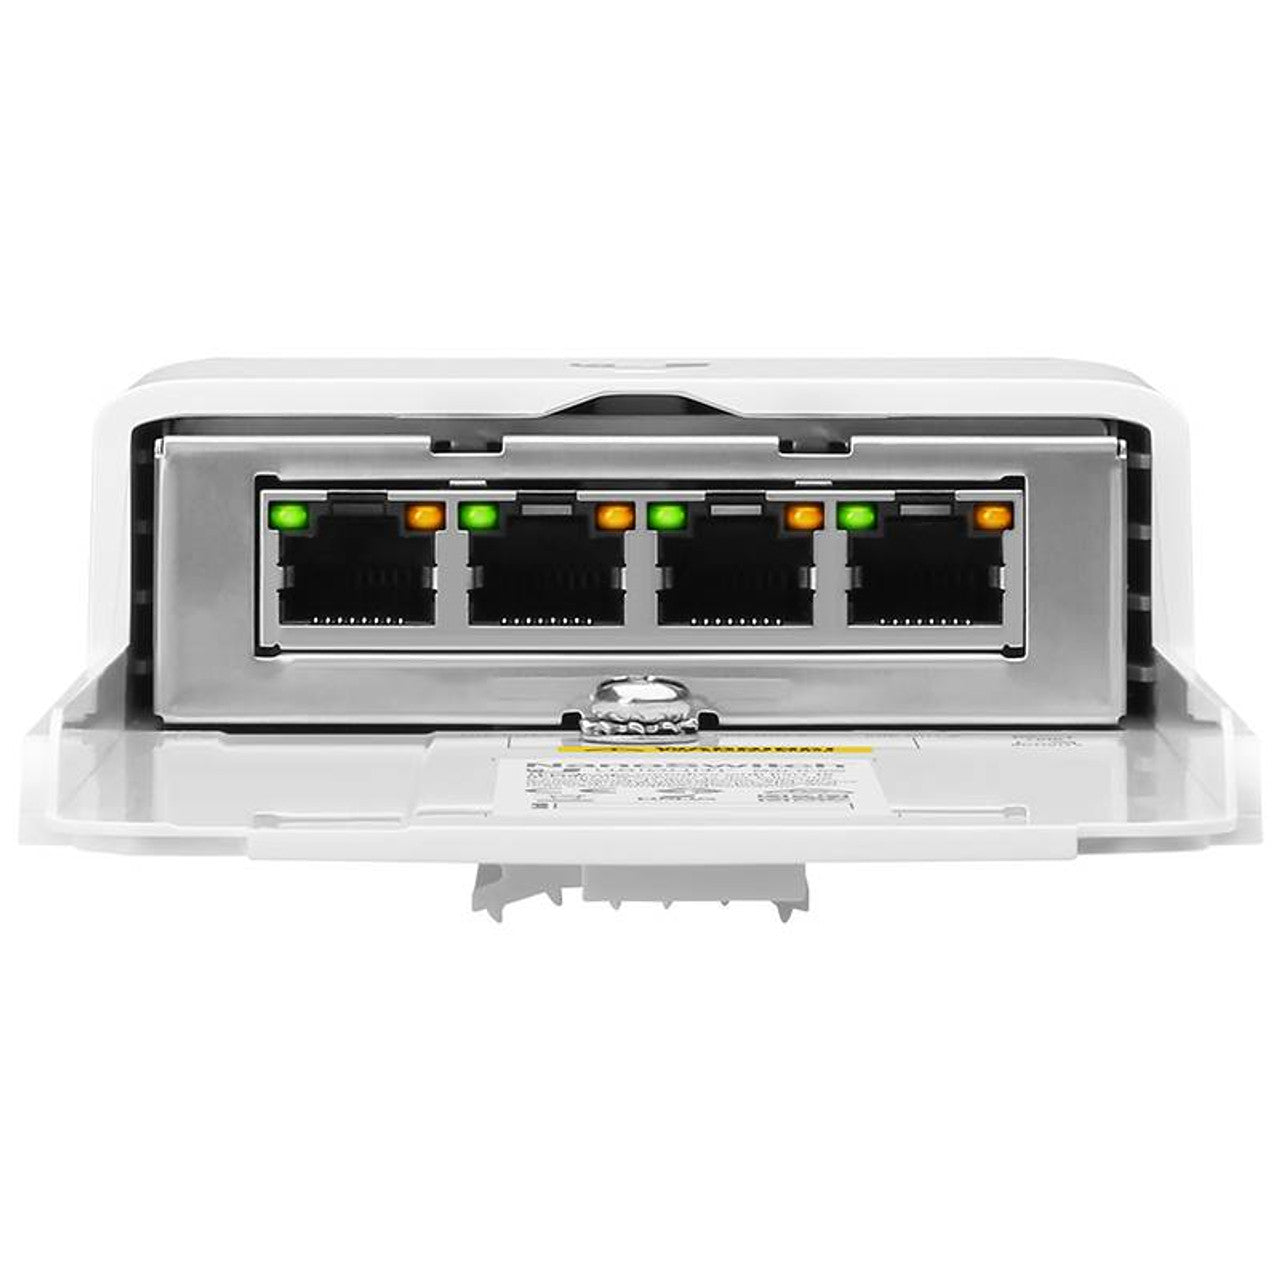 Ubiquiti NanoSwitch 4 Port Outdoor Gigabit Switch with PoE Passthrough